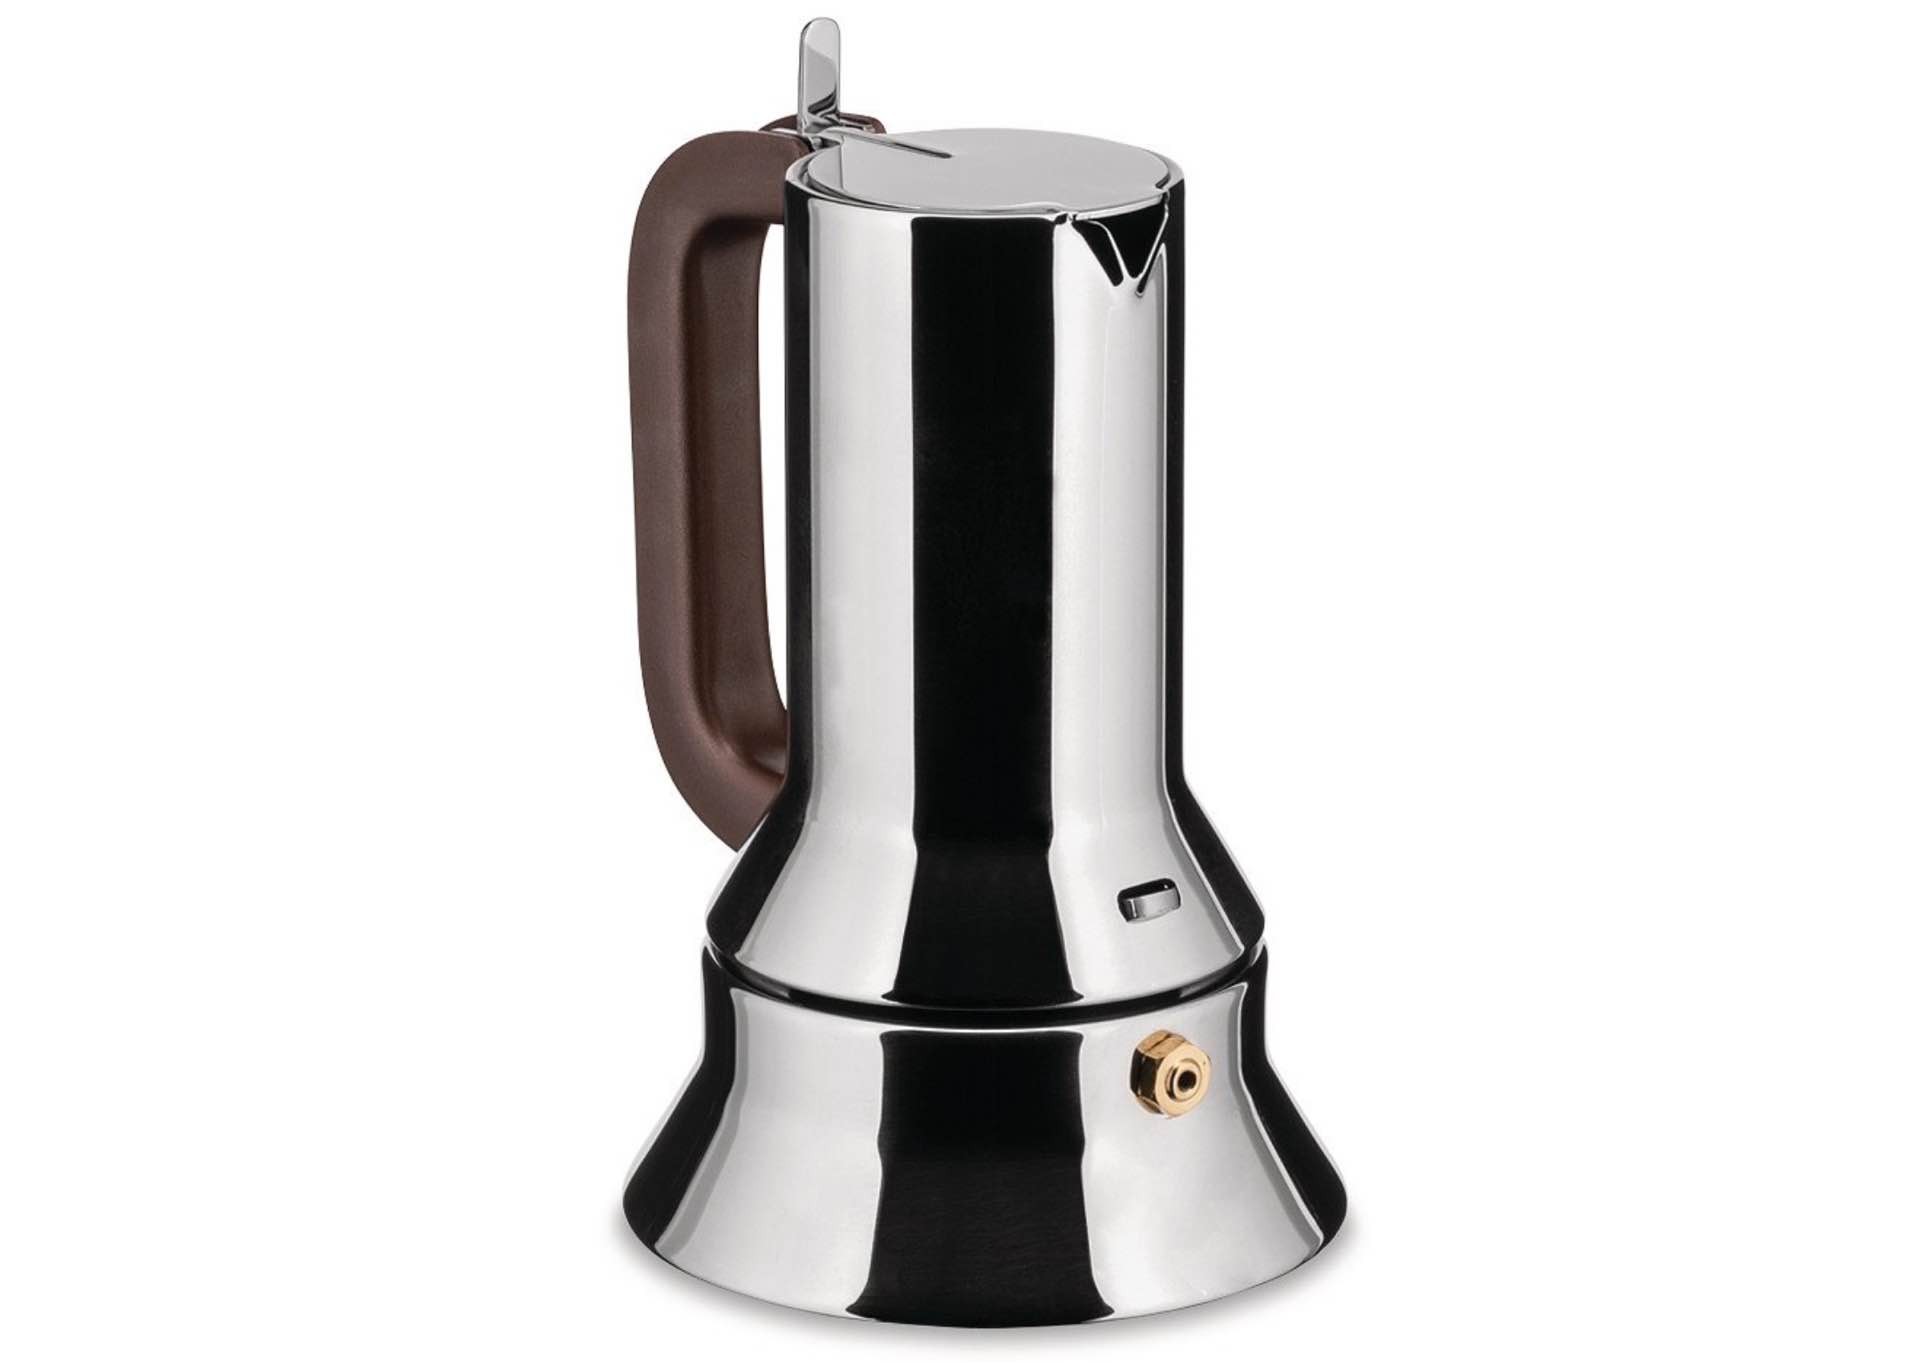 The Alessi 9090 stovetop espresso maker. ($121 for the 6-cup version)